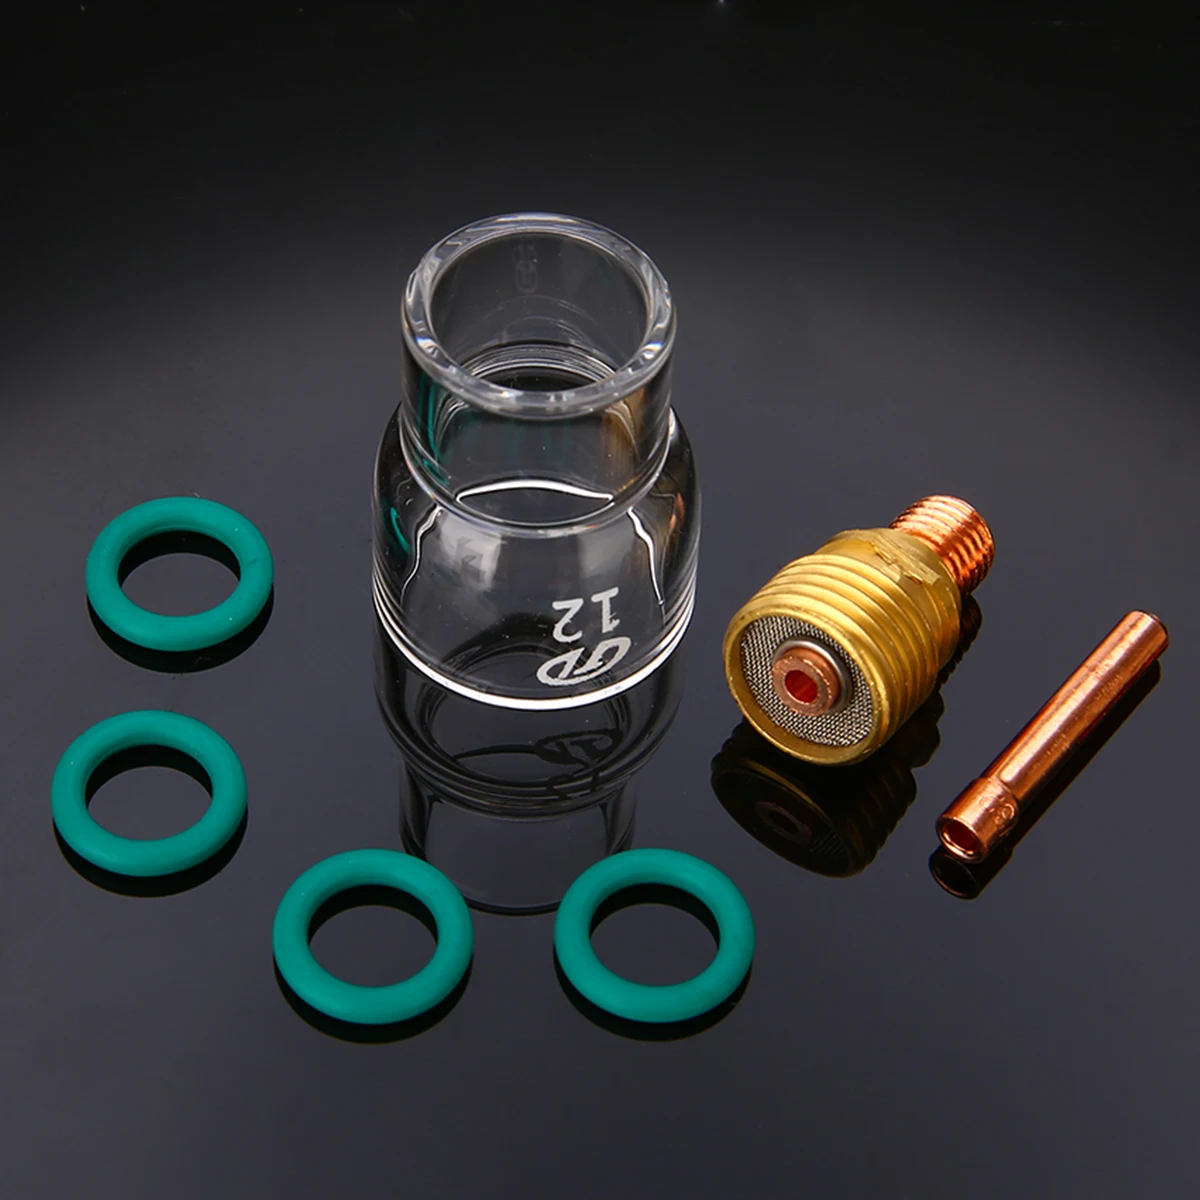 7pcs Practical Pyrex Welding Cup Welding Torch Stubby Gas Lens #12 Glass Pyrex Cup TIG Welding Kit For WP-9/WP-20/WP-25 Mayitr